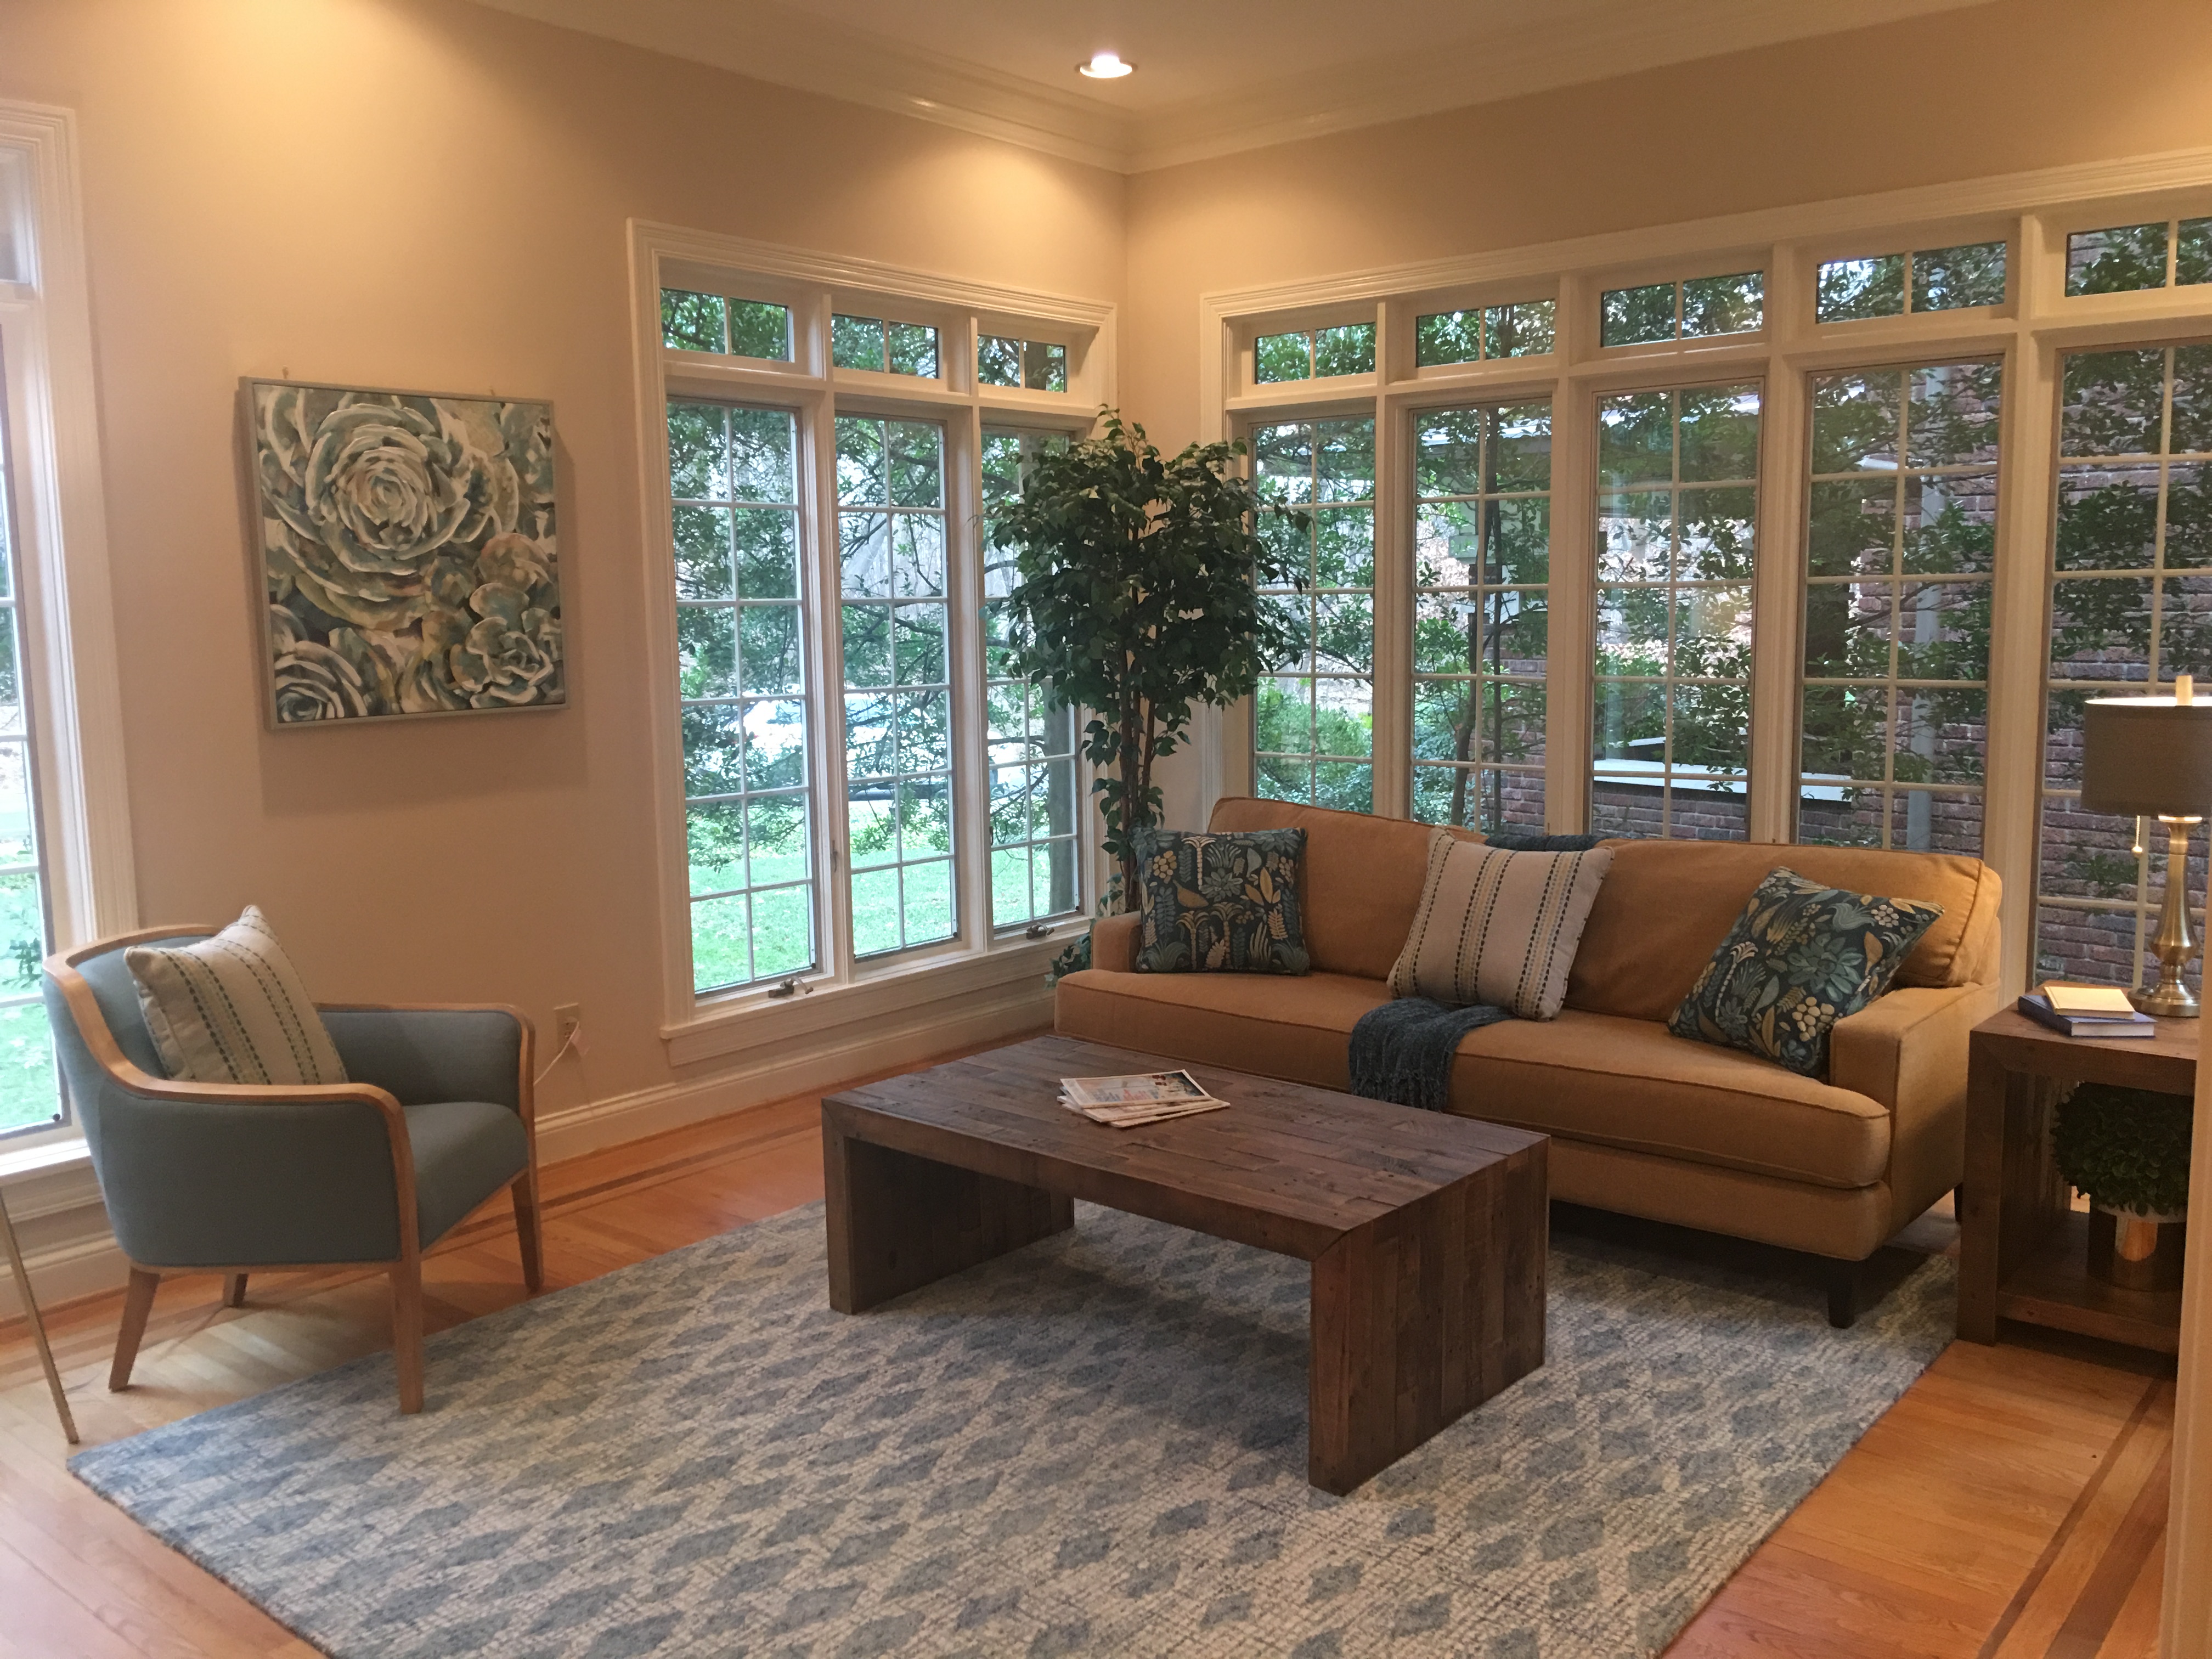 Louisville Kentucky Home Staging, Living Spaces By Lyn, Jennifer Tegeler, Real Estate Home Staging, Sitting Room Staging, Hardwood Flooring, Inlaid Hardwood Flooring Detail, Artwork, Sitting Room, Area Rug, Lighting, Accessories